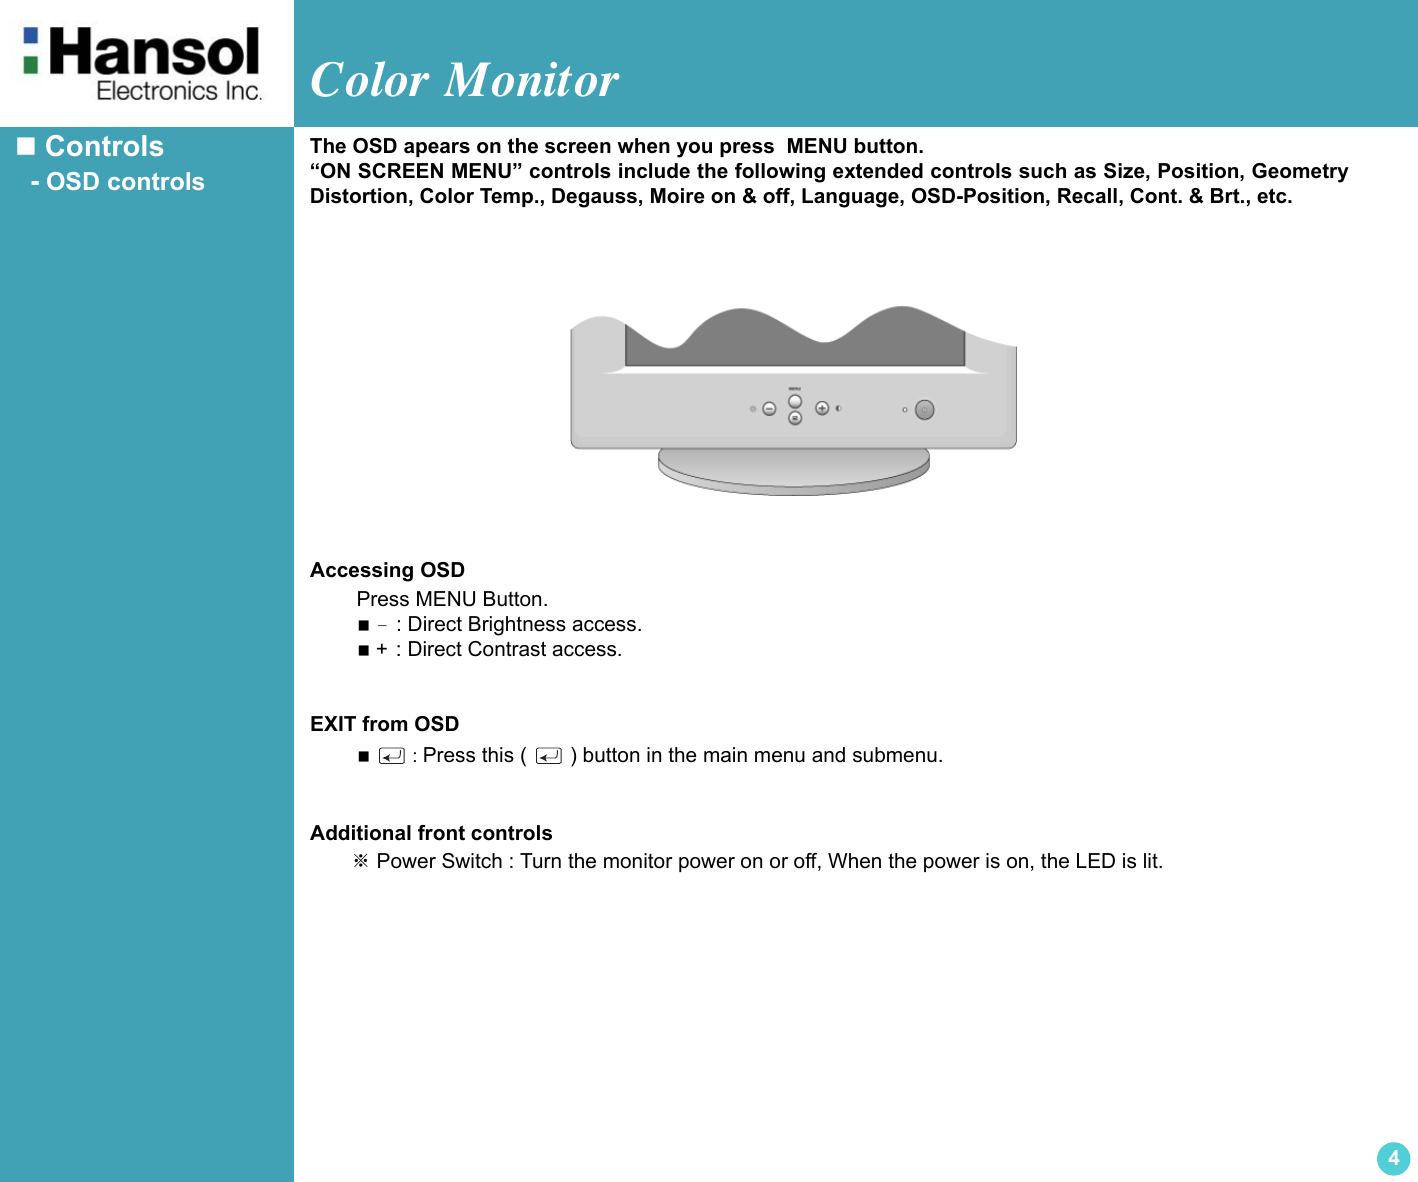 Color Monitor4 Controls  - OSD controlsAccessing OSD        Press MENU Button. － : Direct Brightness access. + : Direct Contrast access.EXIT from OSD  : Press this (   ) button in the main menu and submenu.Additional front controls      ※ Power Switch : Turn the monitor power on or off, When the power is on, the LED is lit.The OSD apears on the screen when you press  MENU button.“ON SCREEN MENU” controls include the following extended controls such as Size, Position, GeometryDistortion, Color Temp., Degauss, Moire on &amp; off, Language, OSD-Position, Recall, Cont. &amp; Brt., etc.